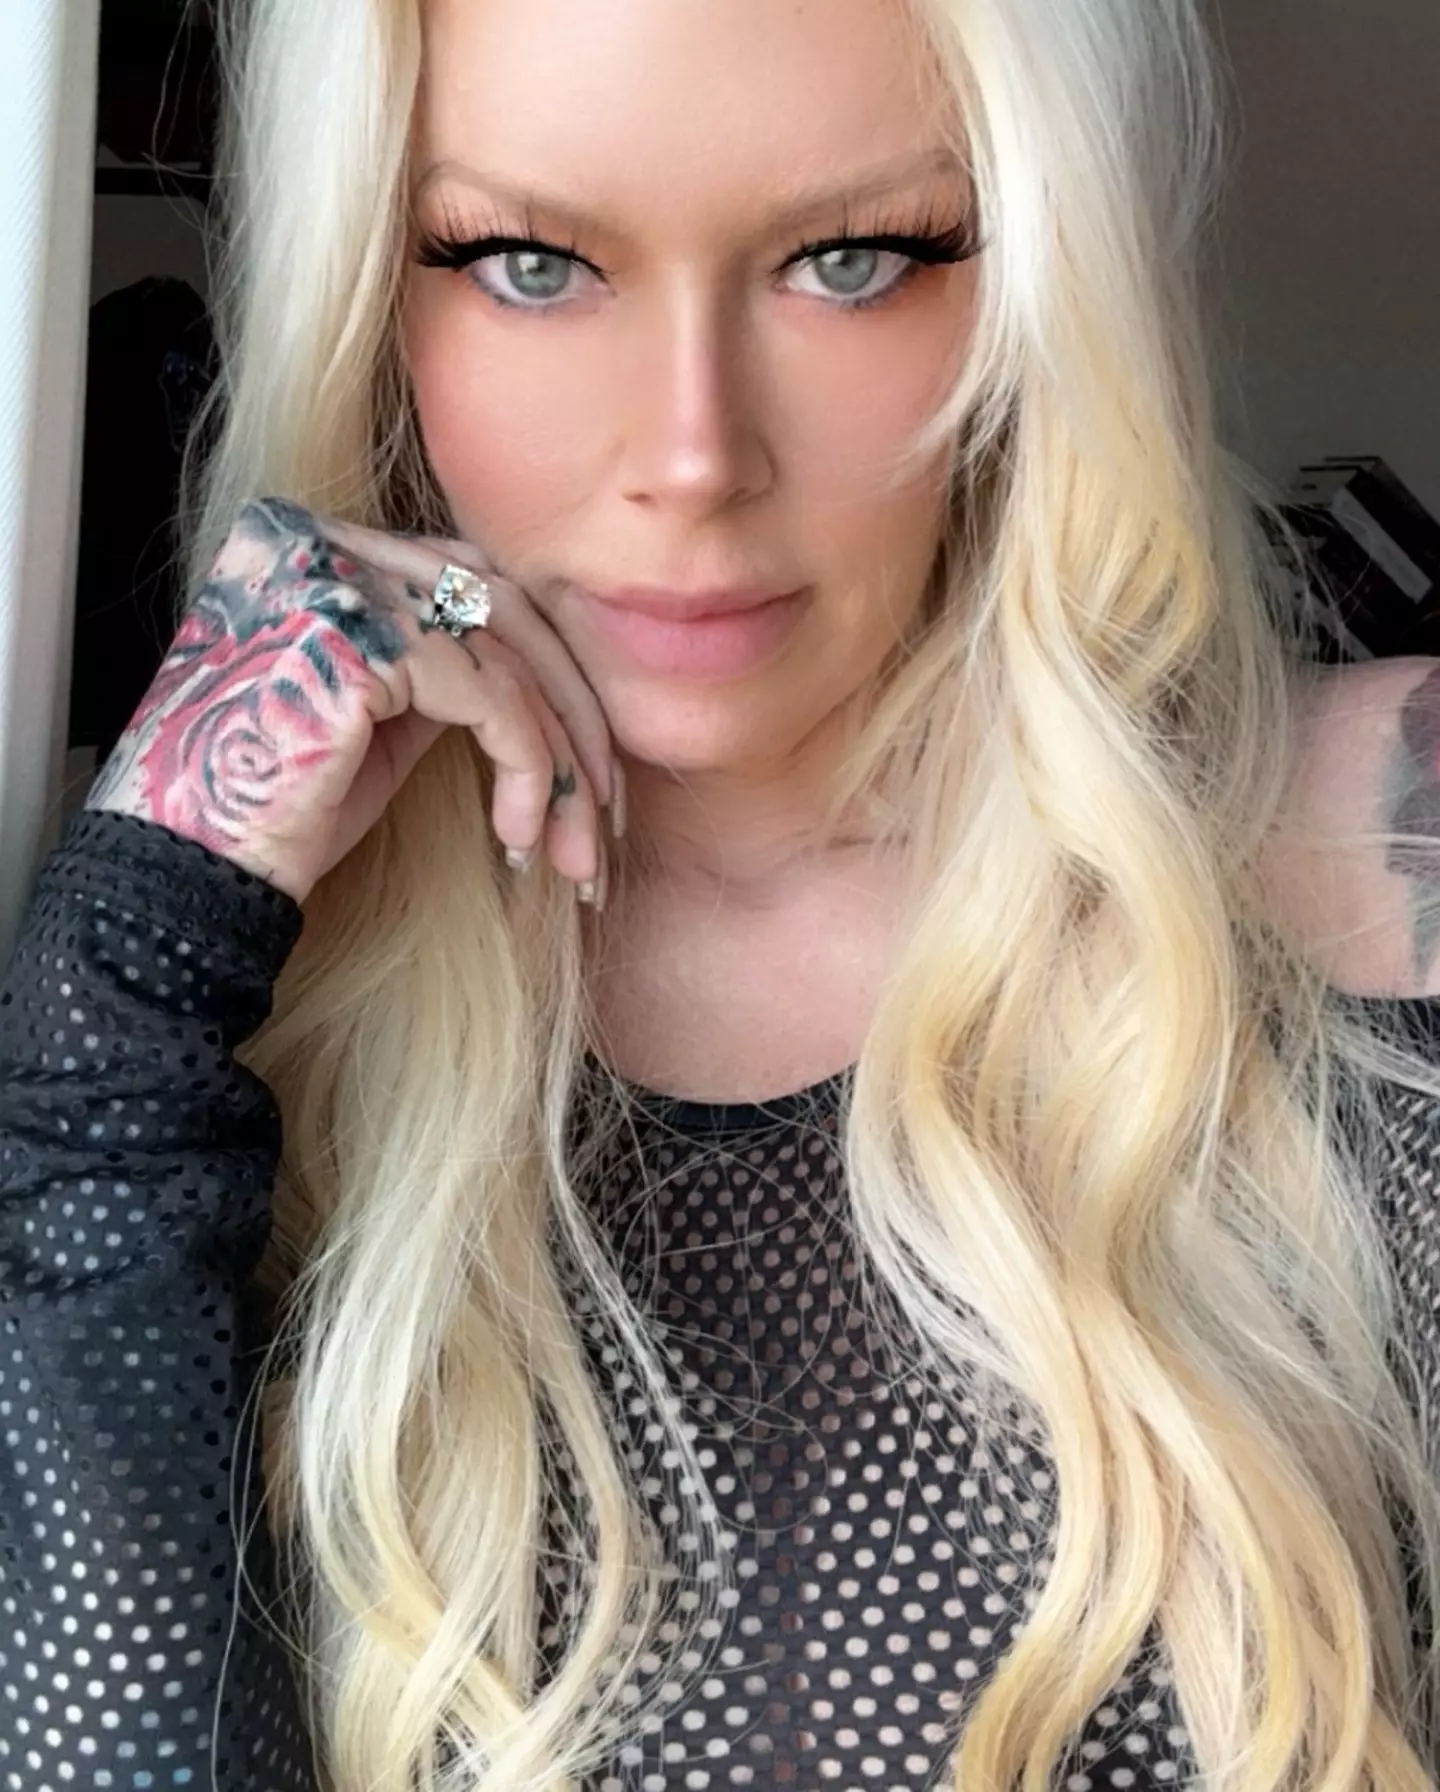 Jenna Jameson was left wheelchair-bound after a mystery illness gave her 'extreme muscle weakness.'